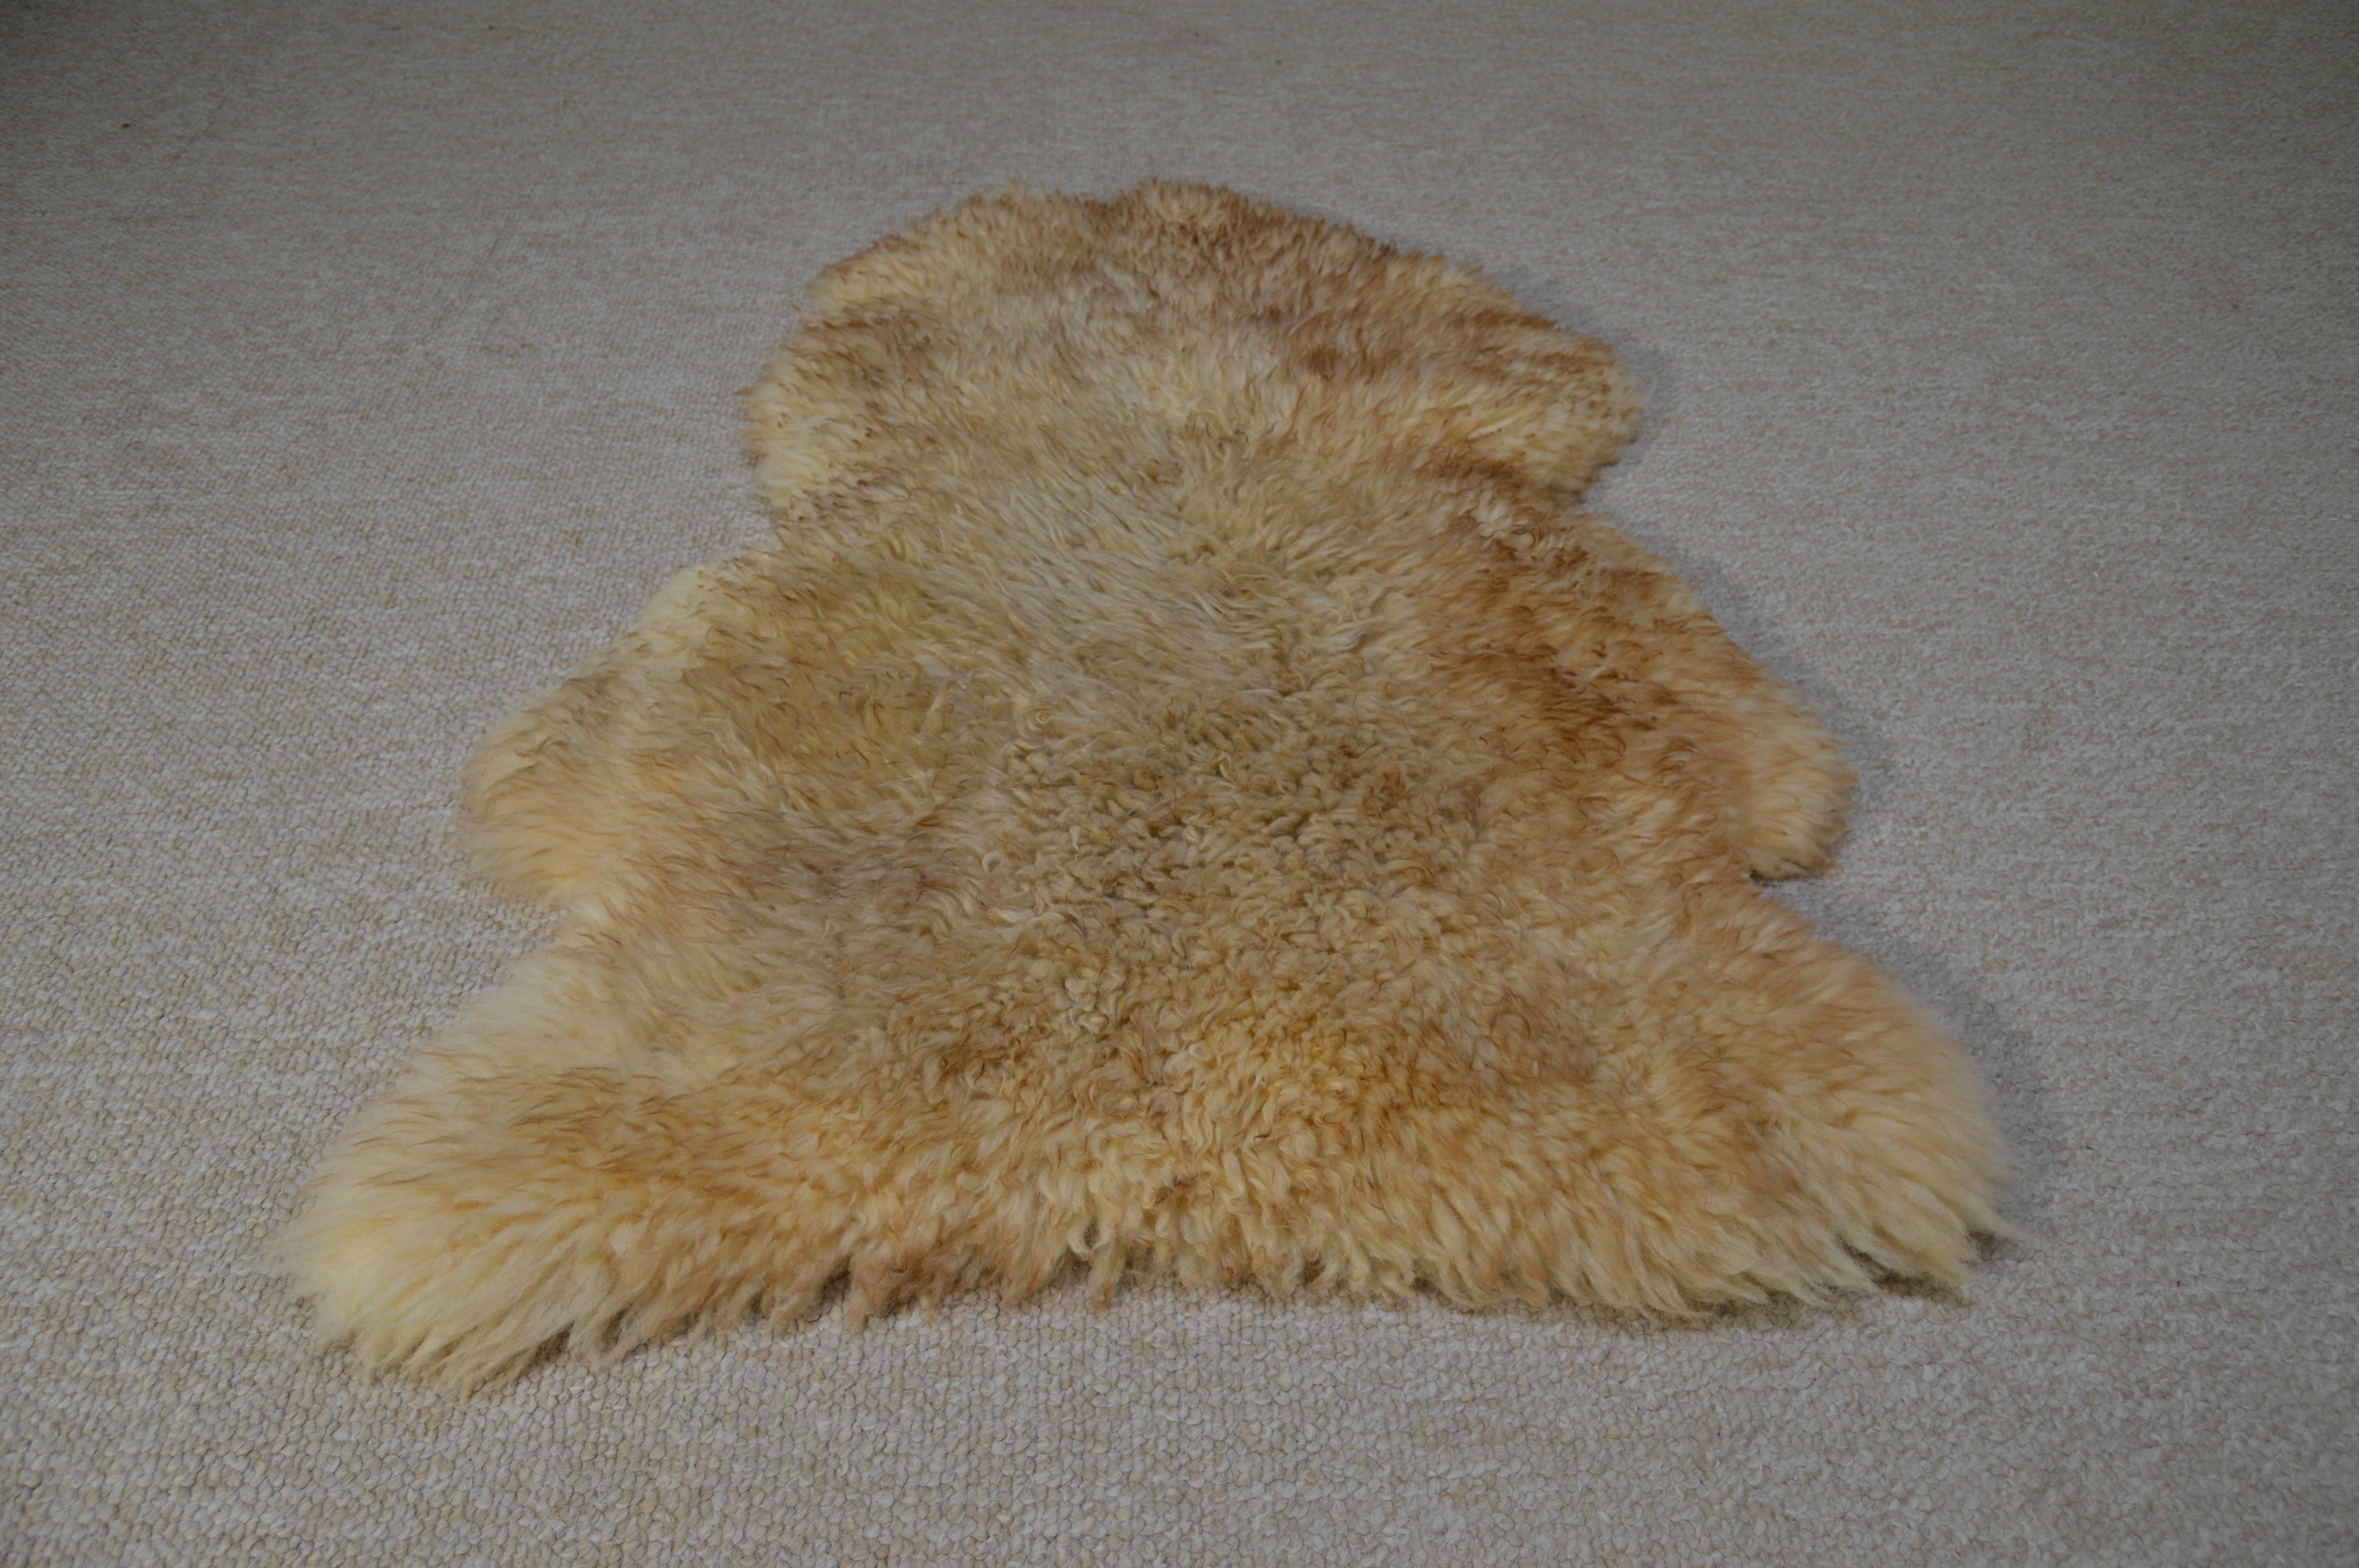 A beautiful, plush and very clean sheepskin throw. Well maintained and hardly used at all. Gorgeous original color.
Thickness: 3".